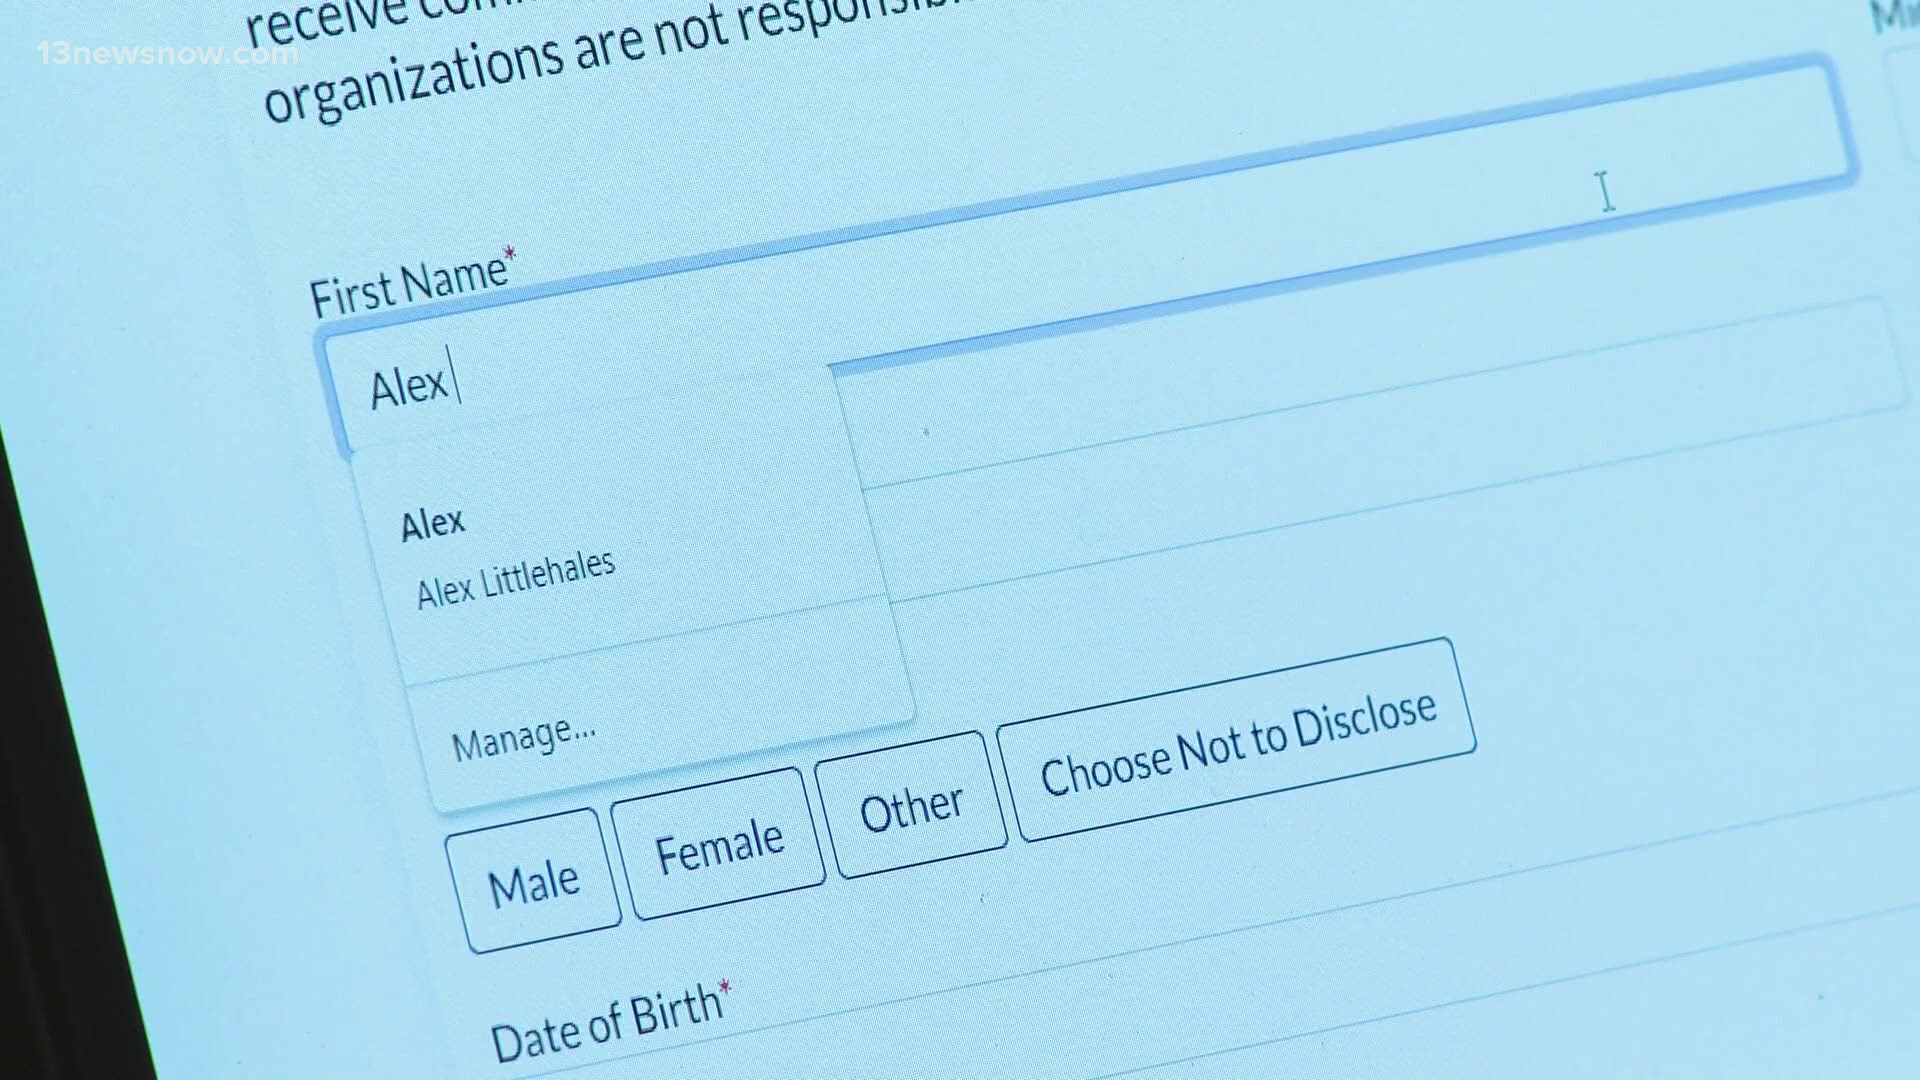 A new statewide COVID-19 vaccine registration tool launched Tuesday, but not without some issues!